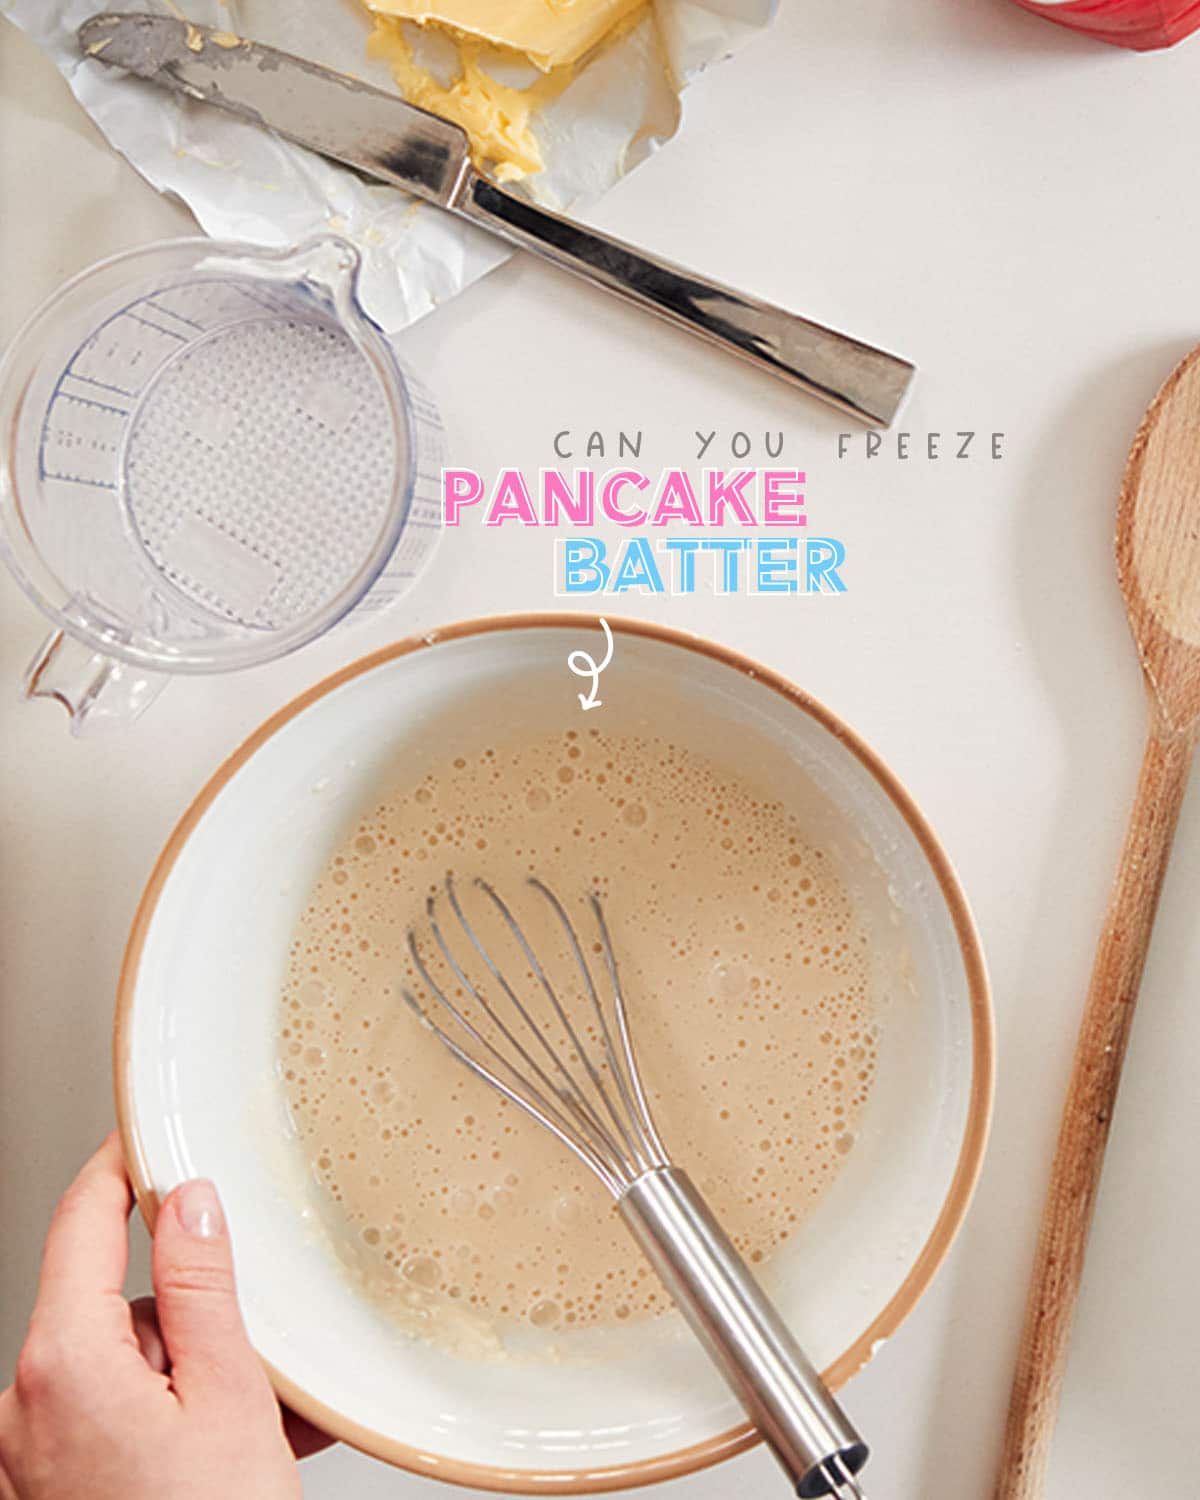 Pancakes made with frozen batter will not have the same light and fluffy texture as the fresh batter because some leavening properties of the baking powder begin to work immediately after mixing.